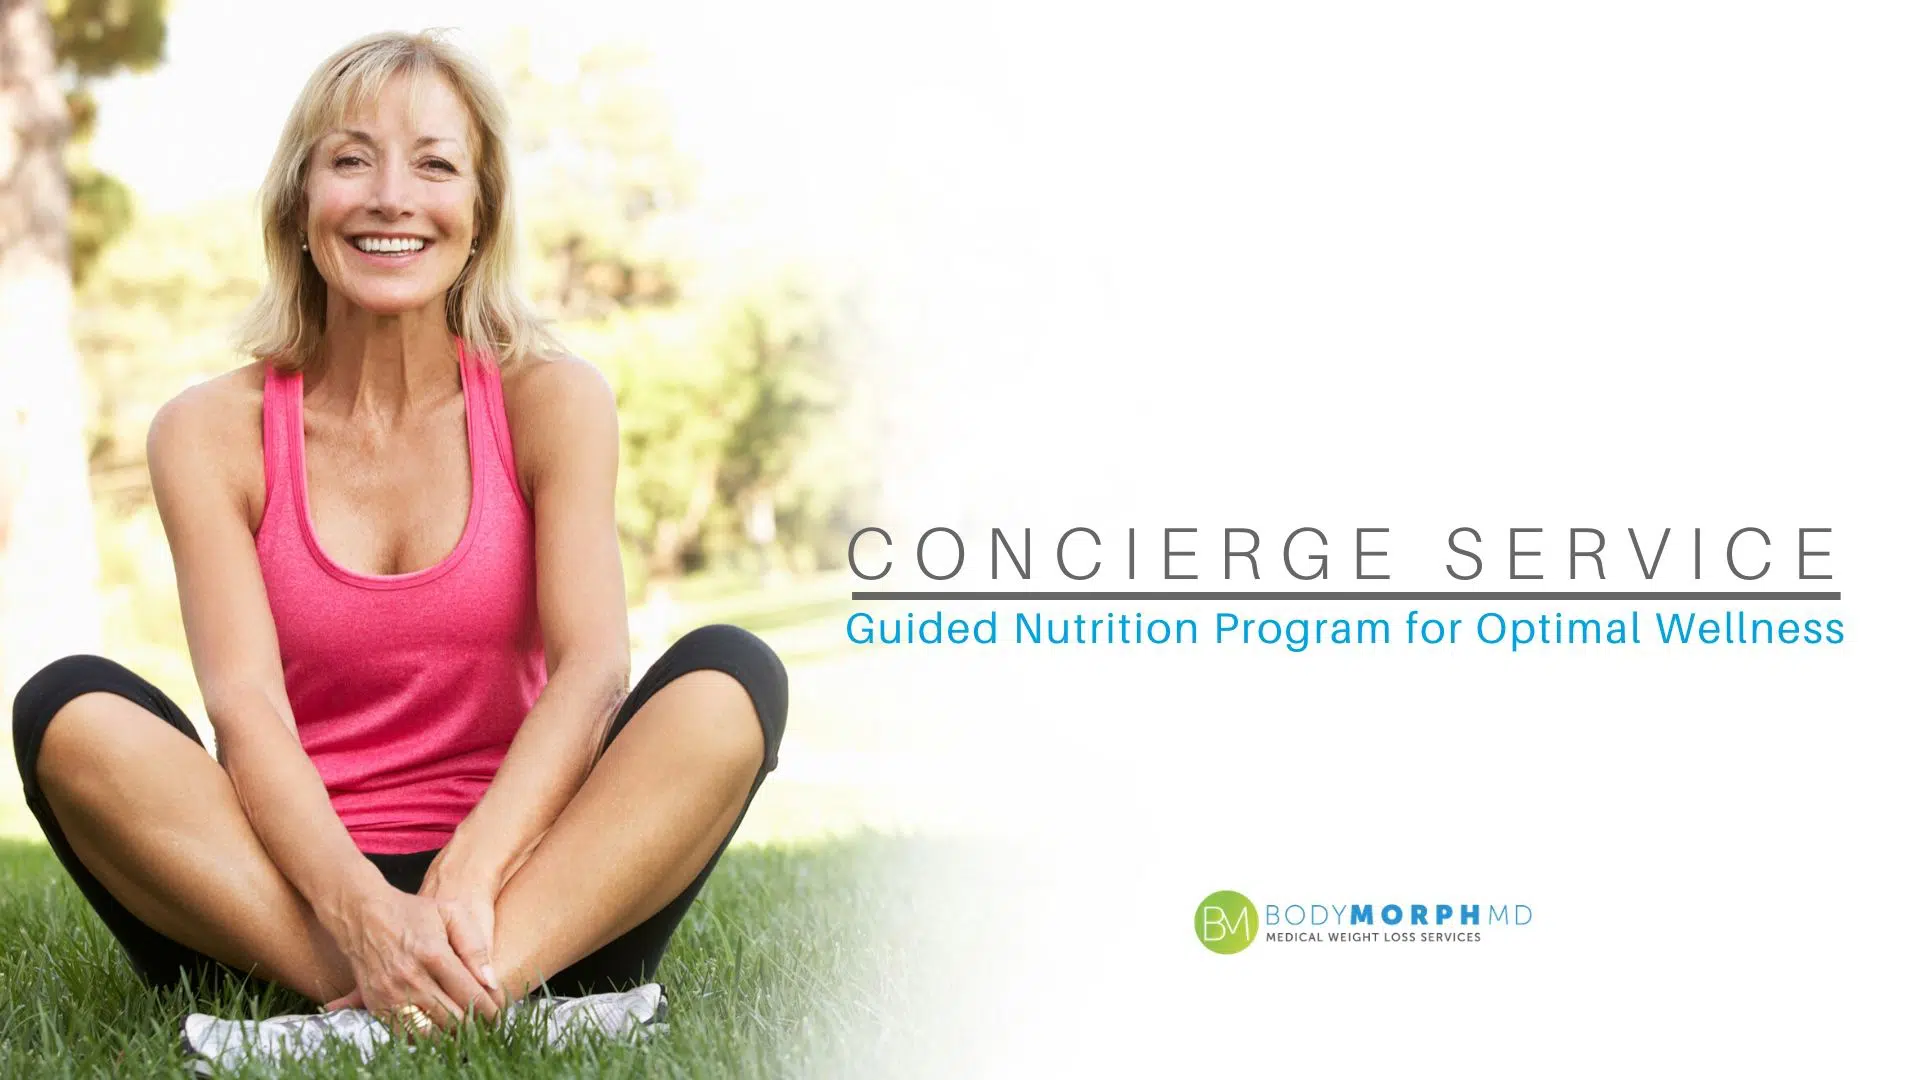 Concierge Nutrition Program in Body Morph MD at Yonkers, NY.